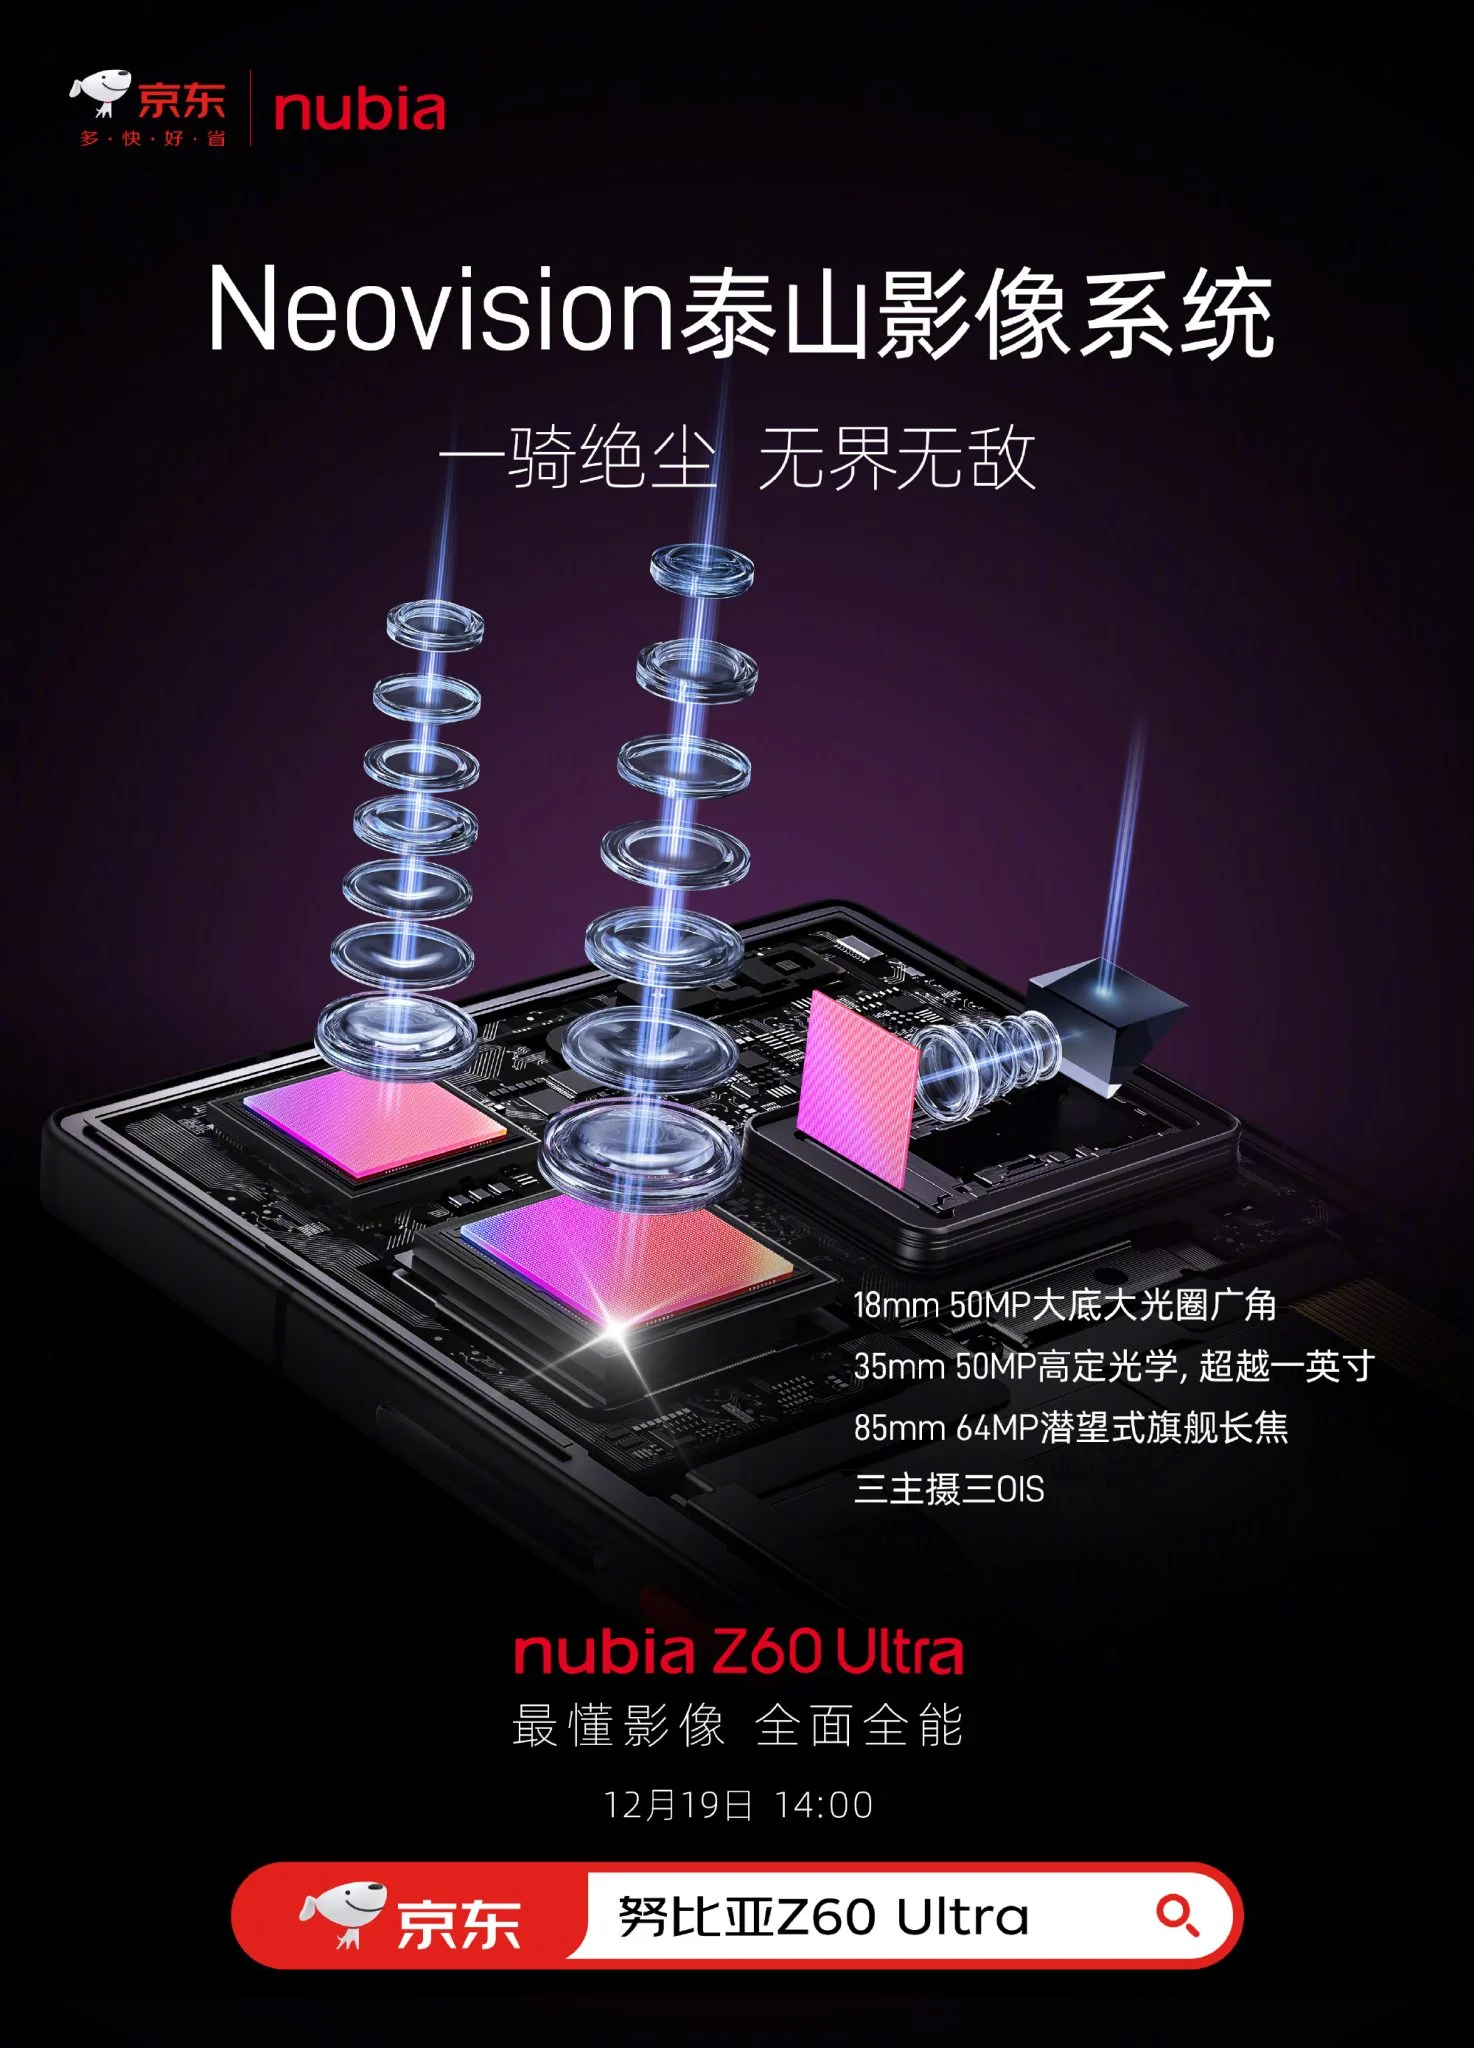 Nubia Z60 Ultra With Under-Display Camera Confirmed to Launch on